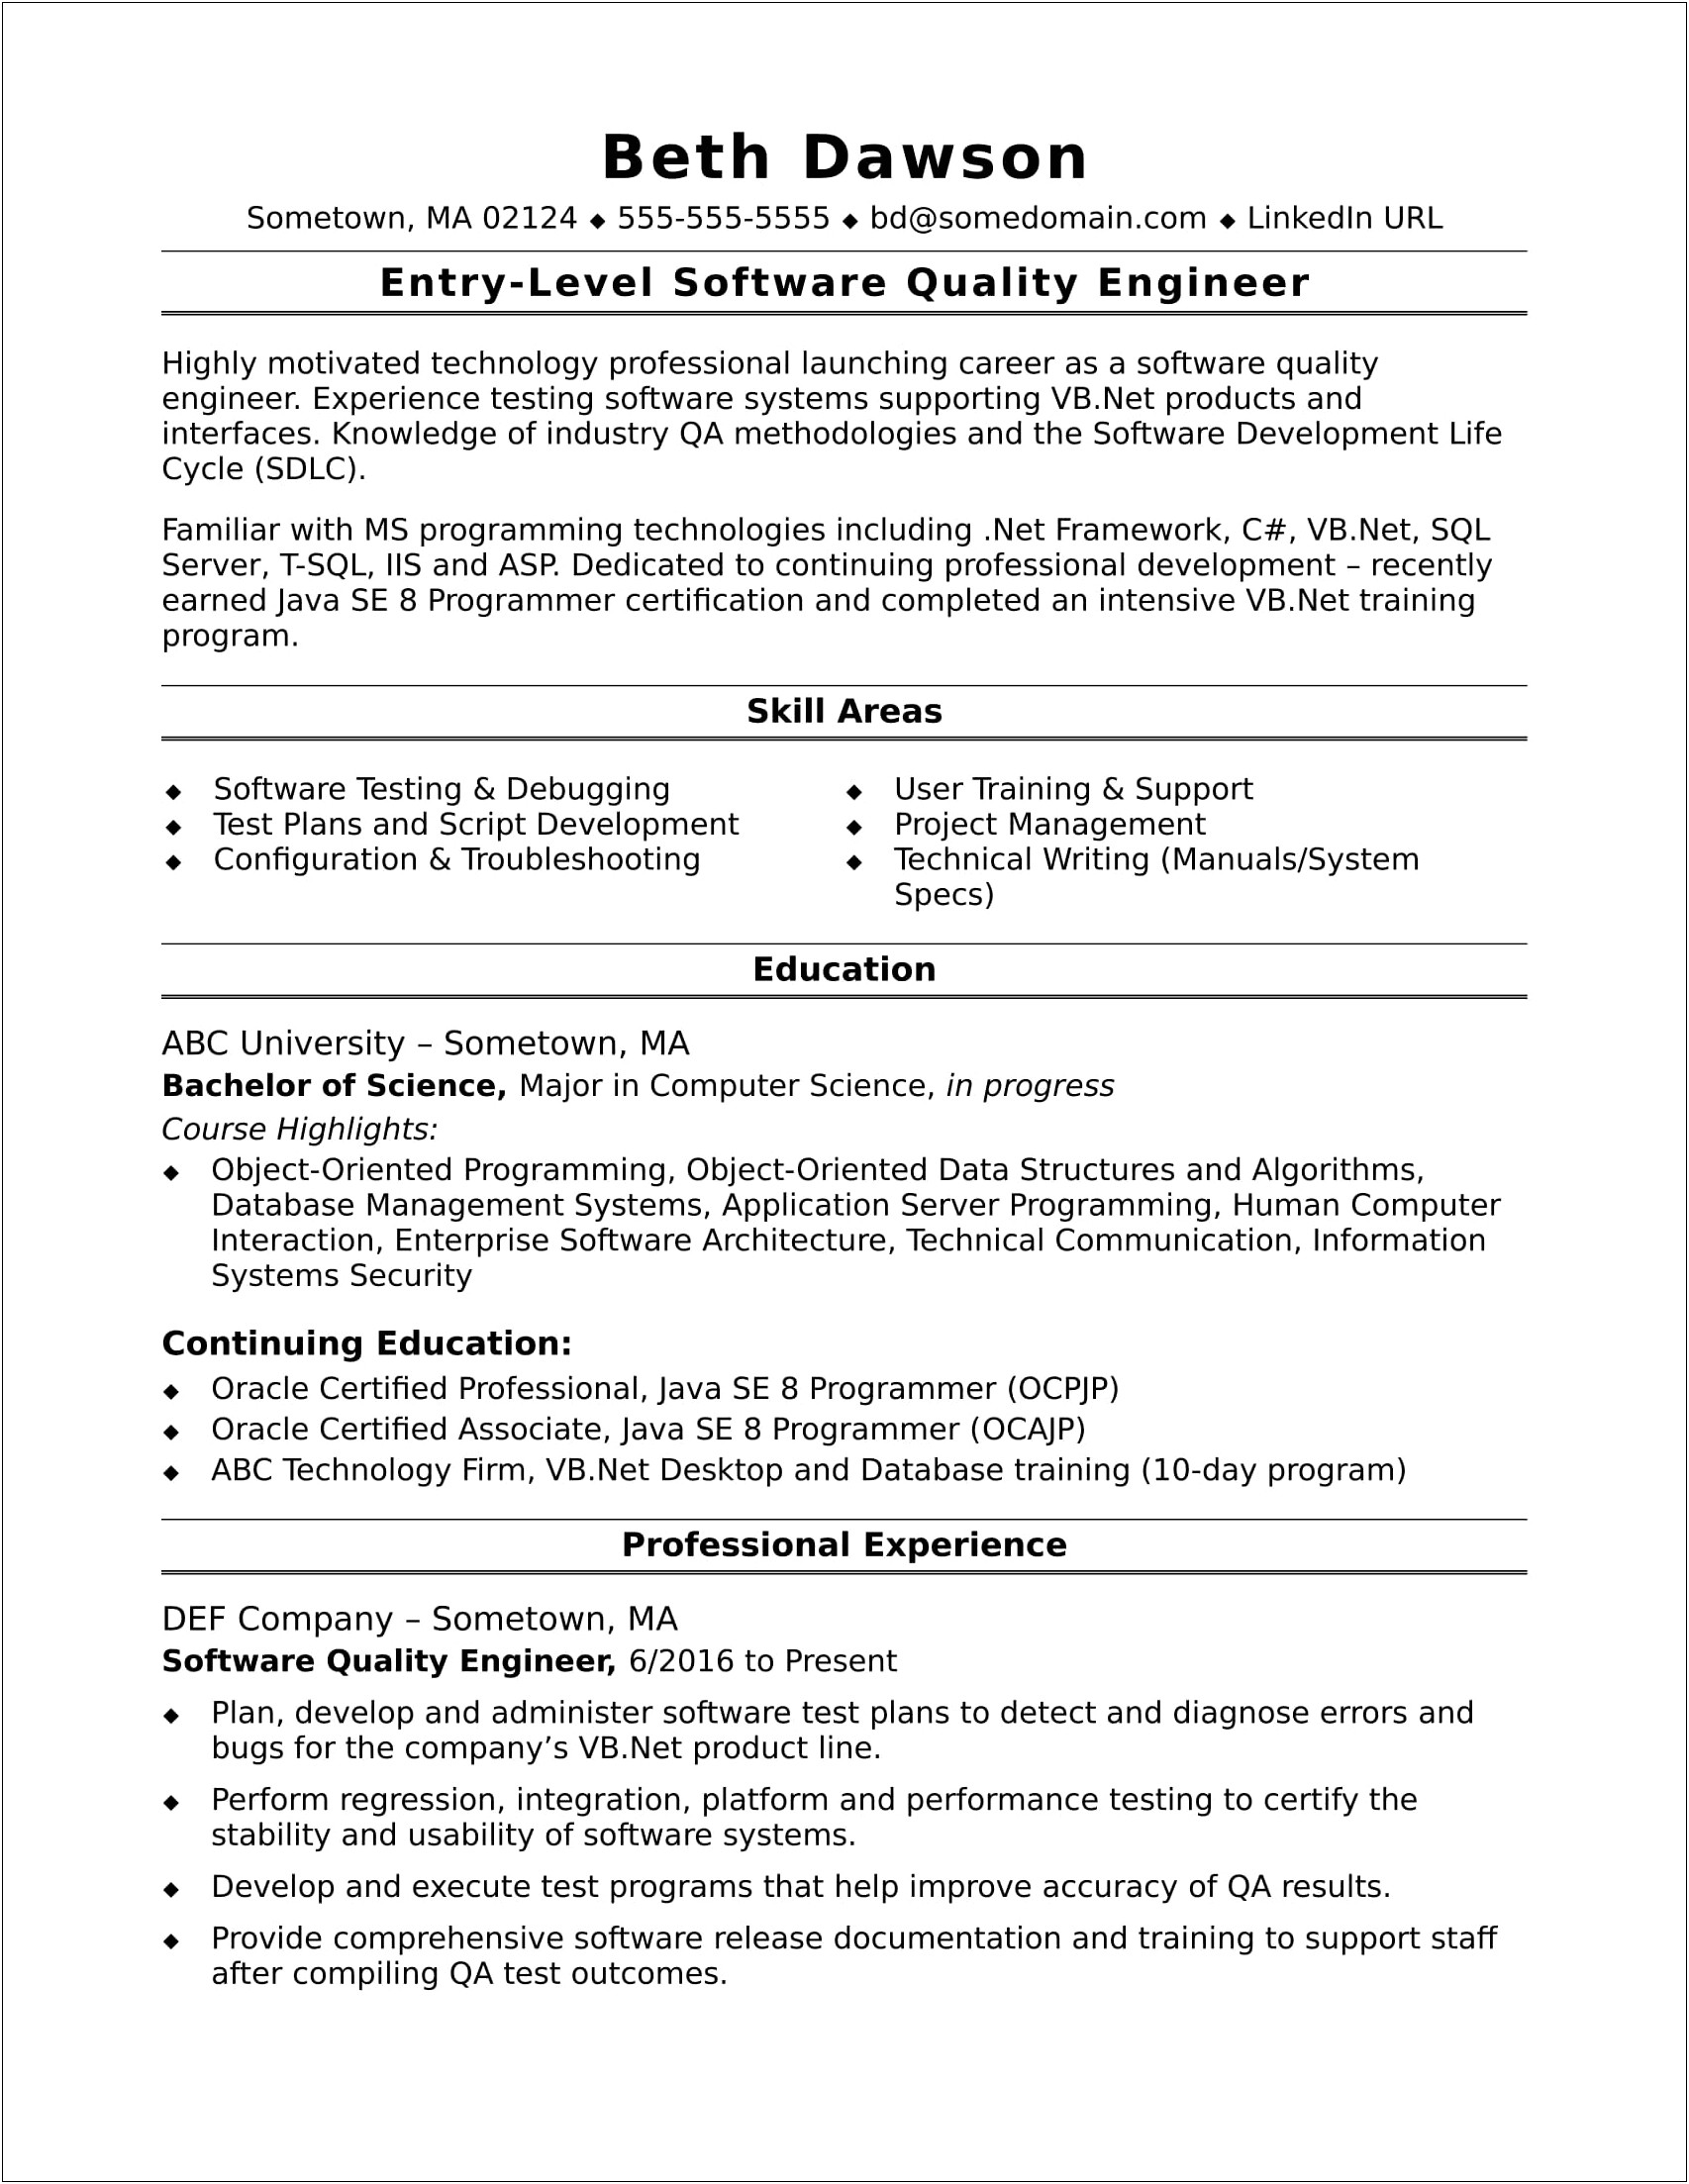 Examples Of Skills In Quality Resumes